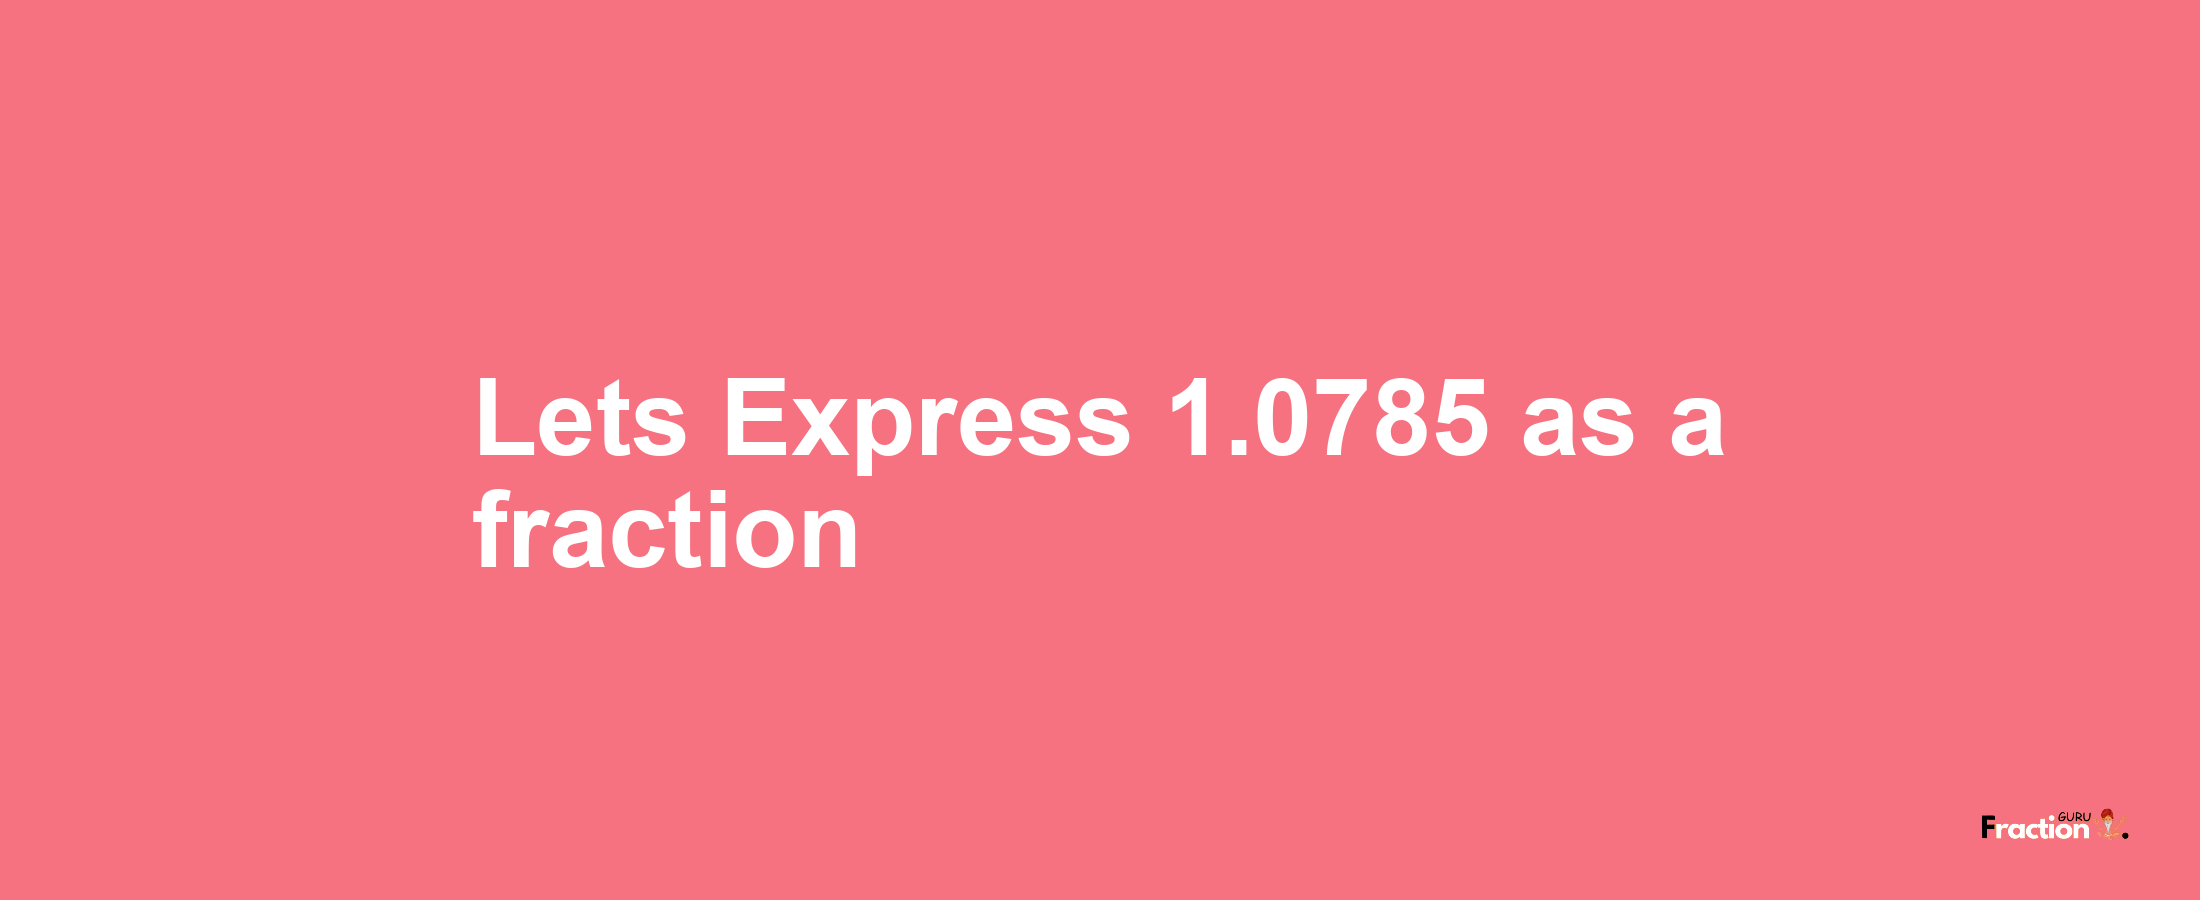 Lets Express 1.0785 as afraction